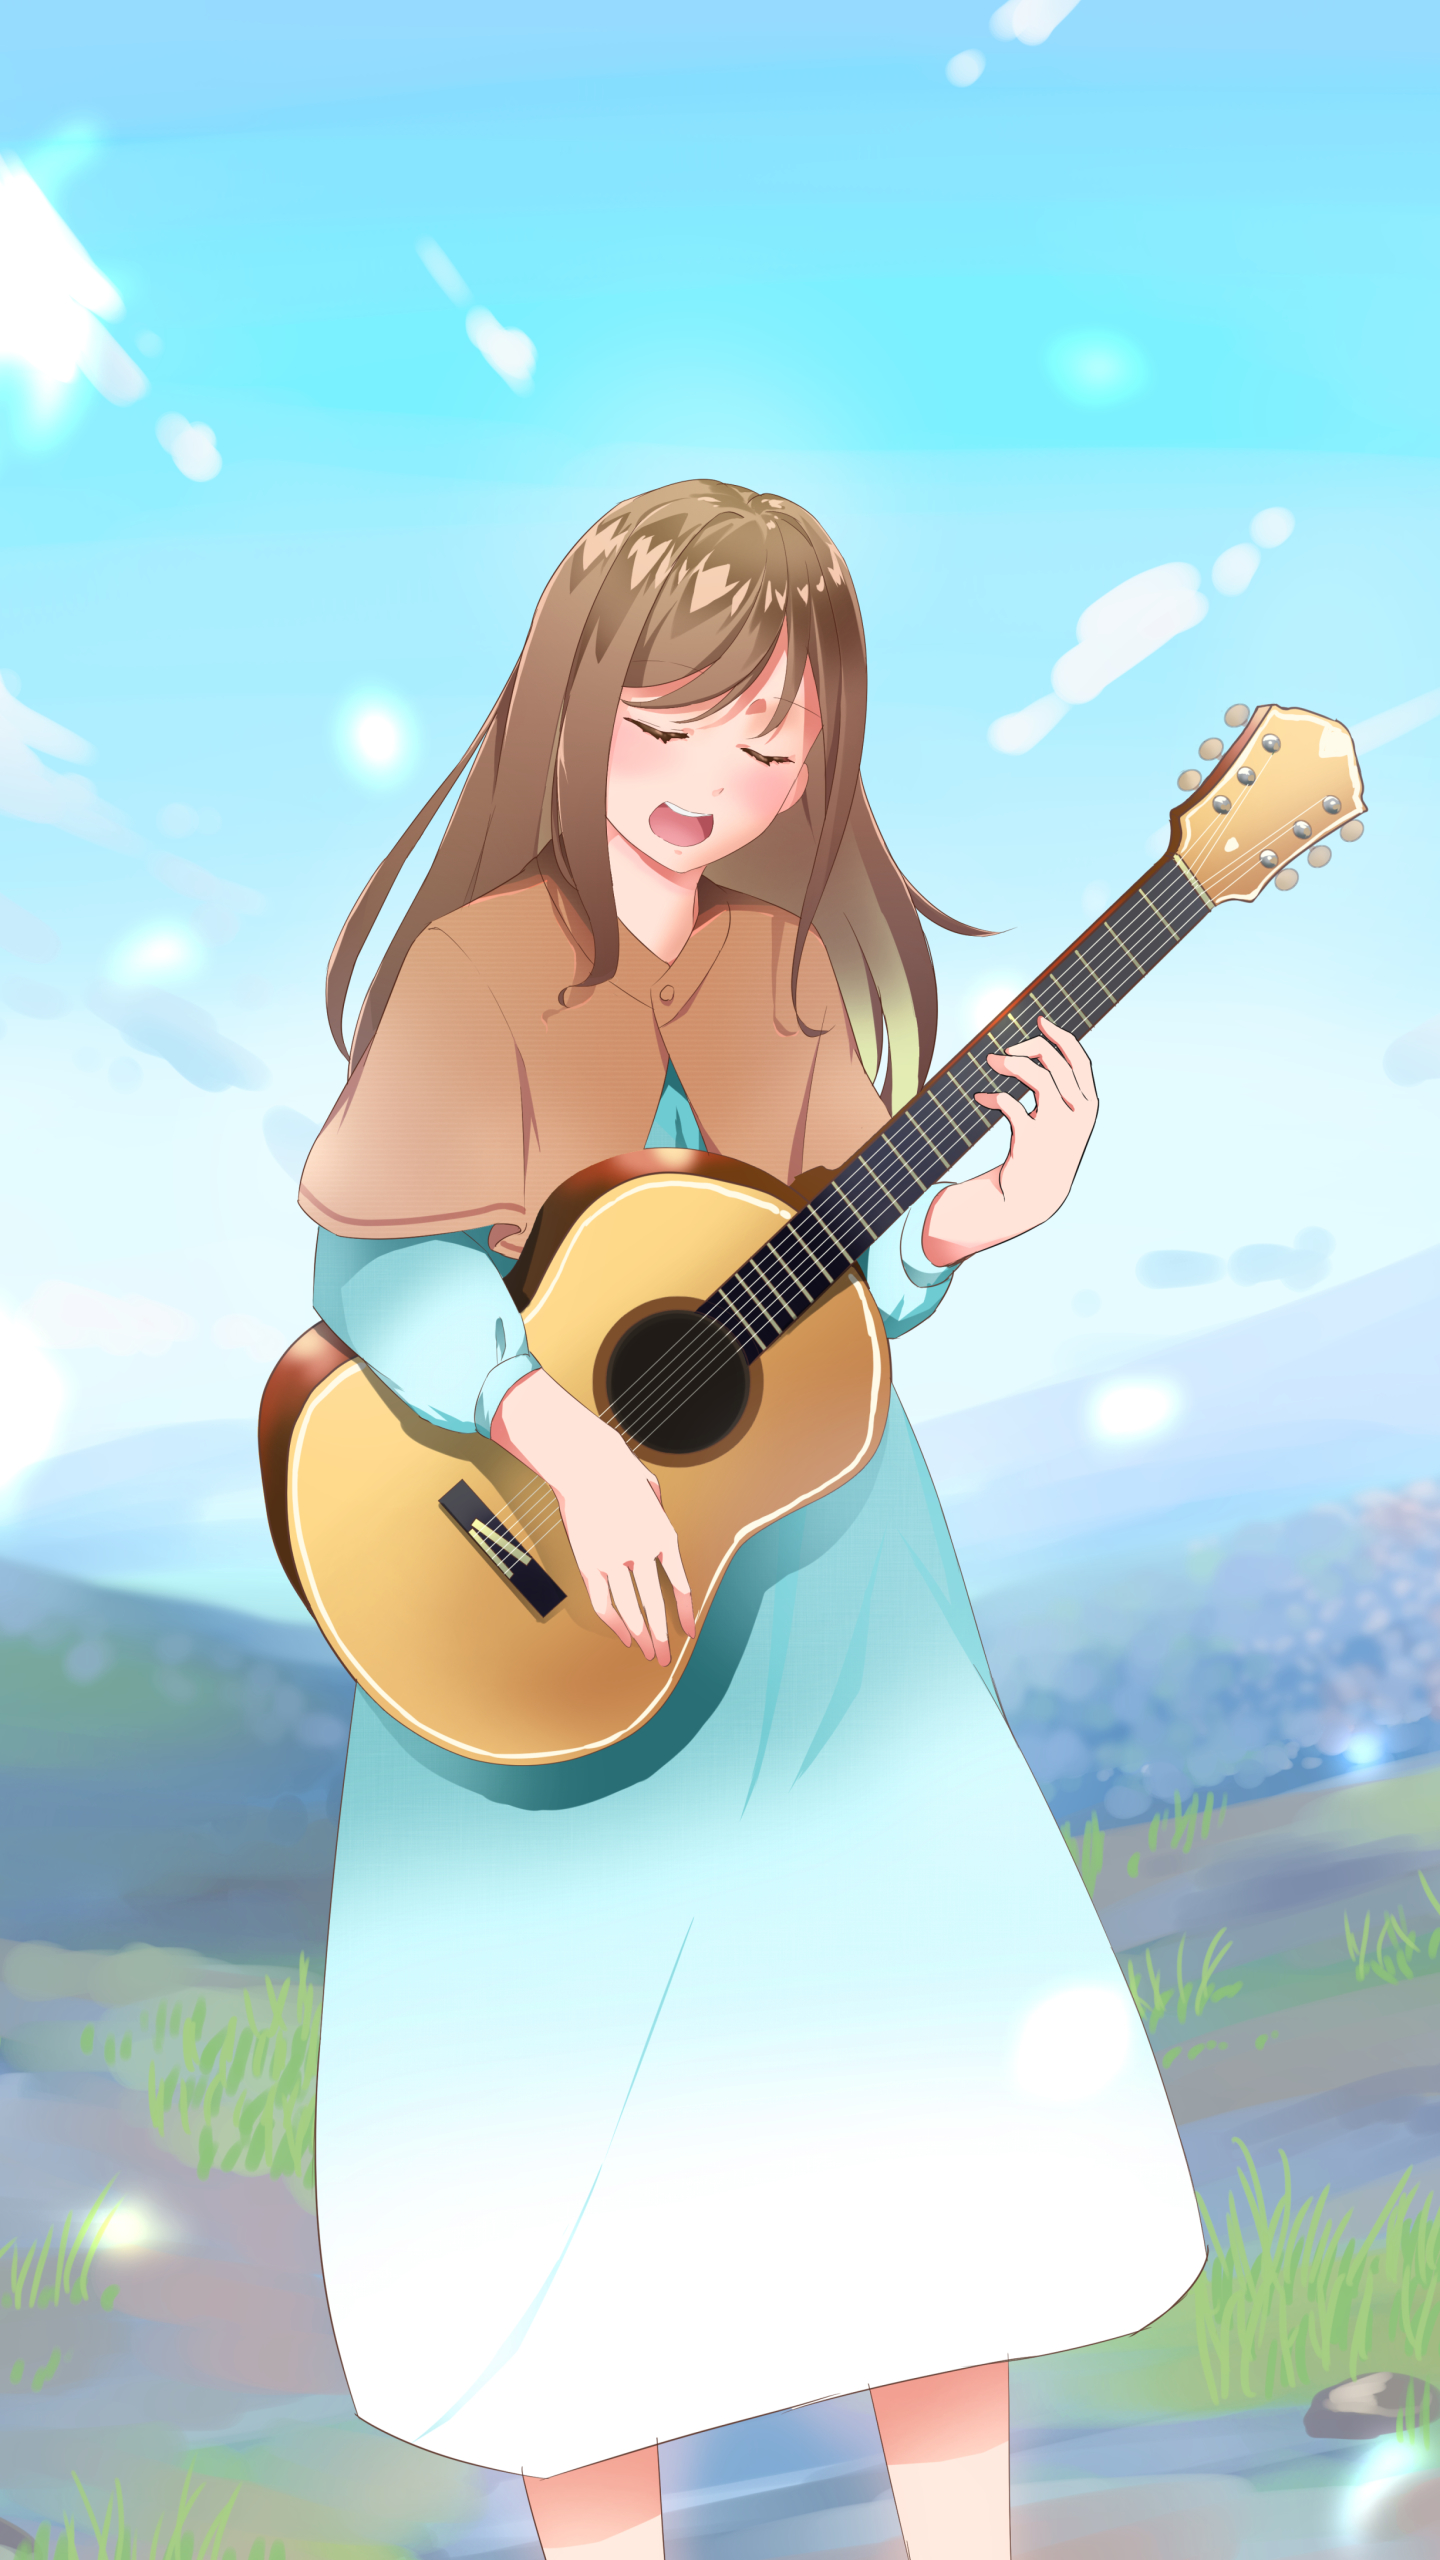 Download wallpaper 840x1336 guitar play anime girl iphone 5 iphone 5s  iphone 5c ipod touch 840x1336 hd background 24177